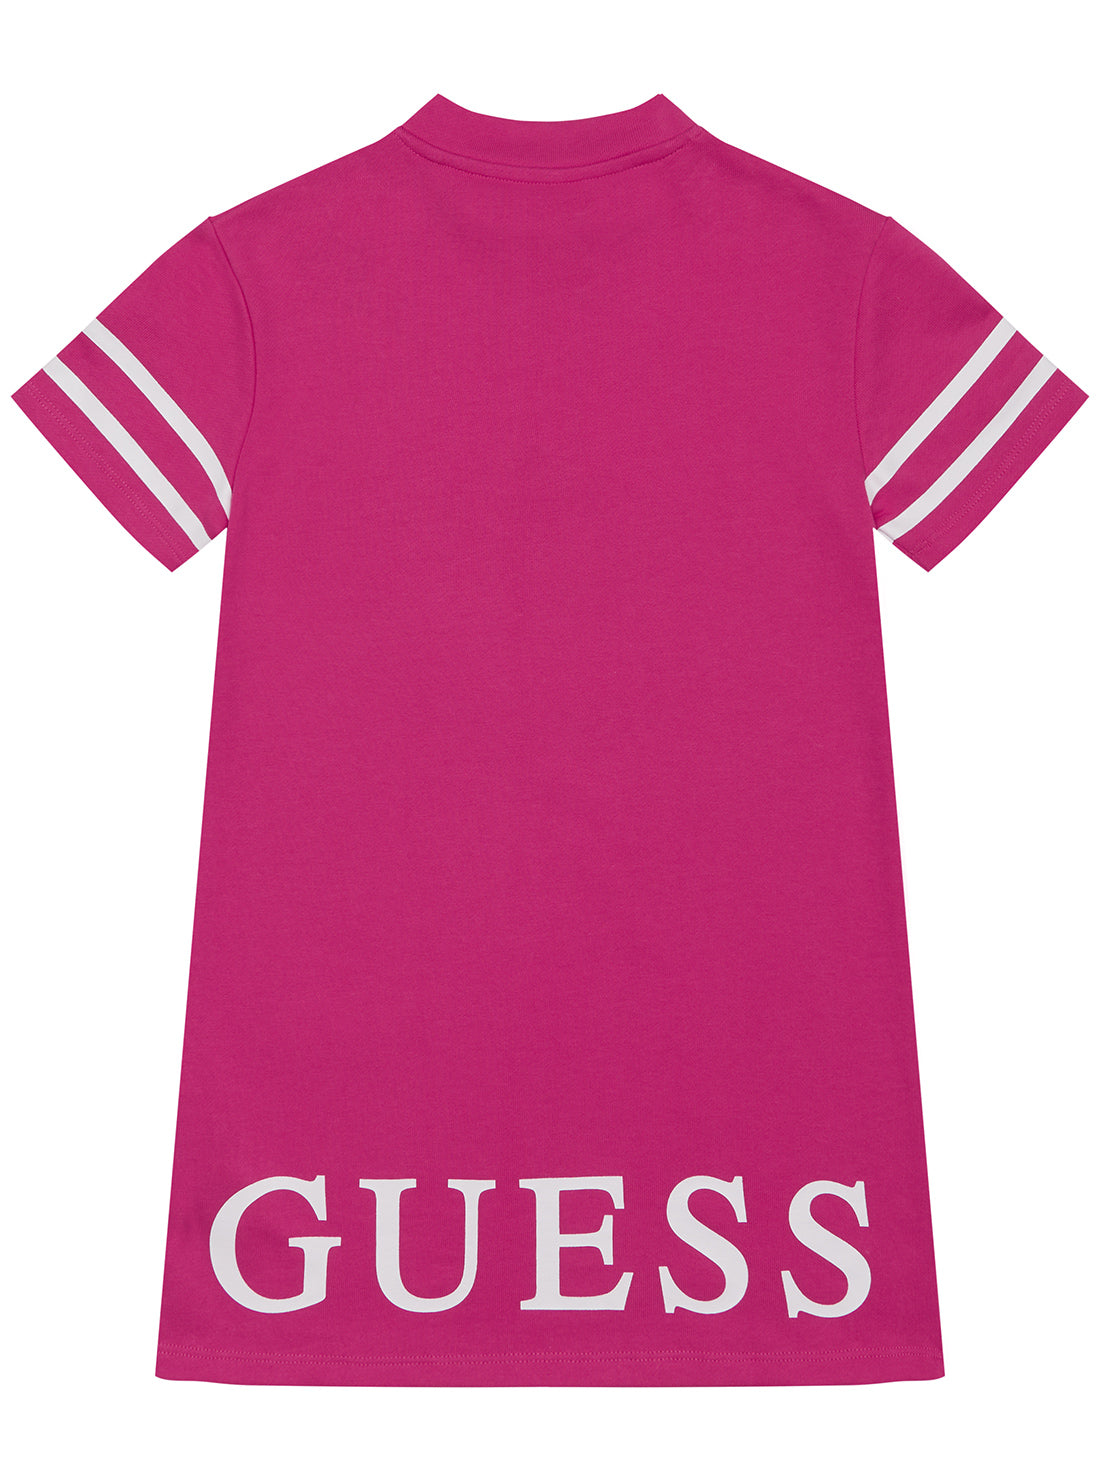 GUESS Bright Pink French Terry Short Sleeve Dress (8-16) back view